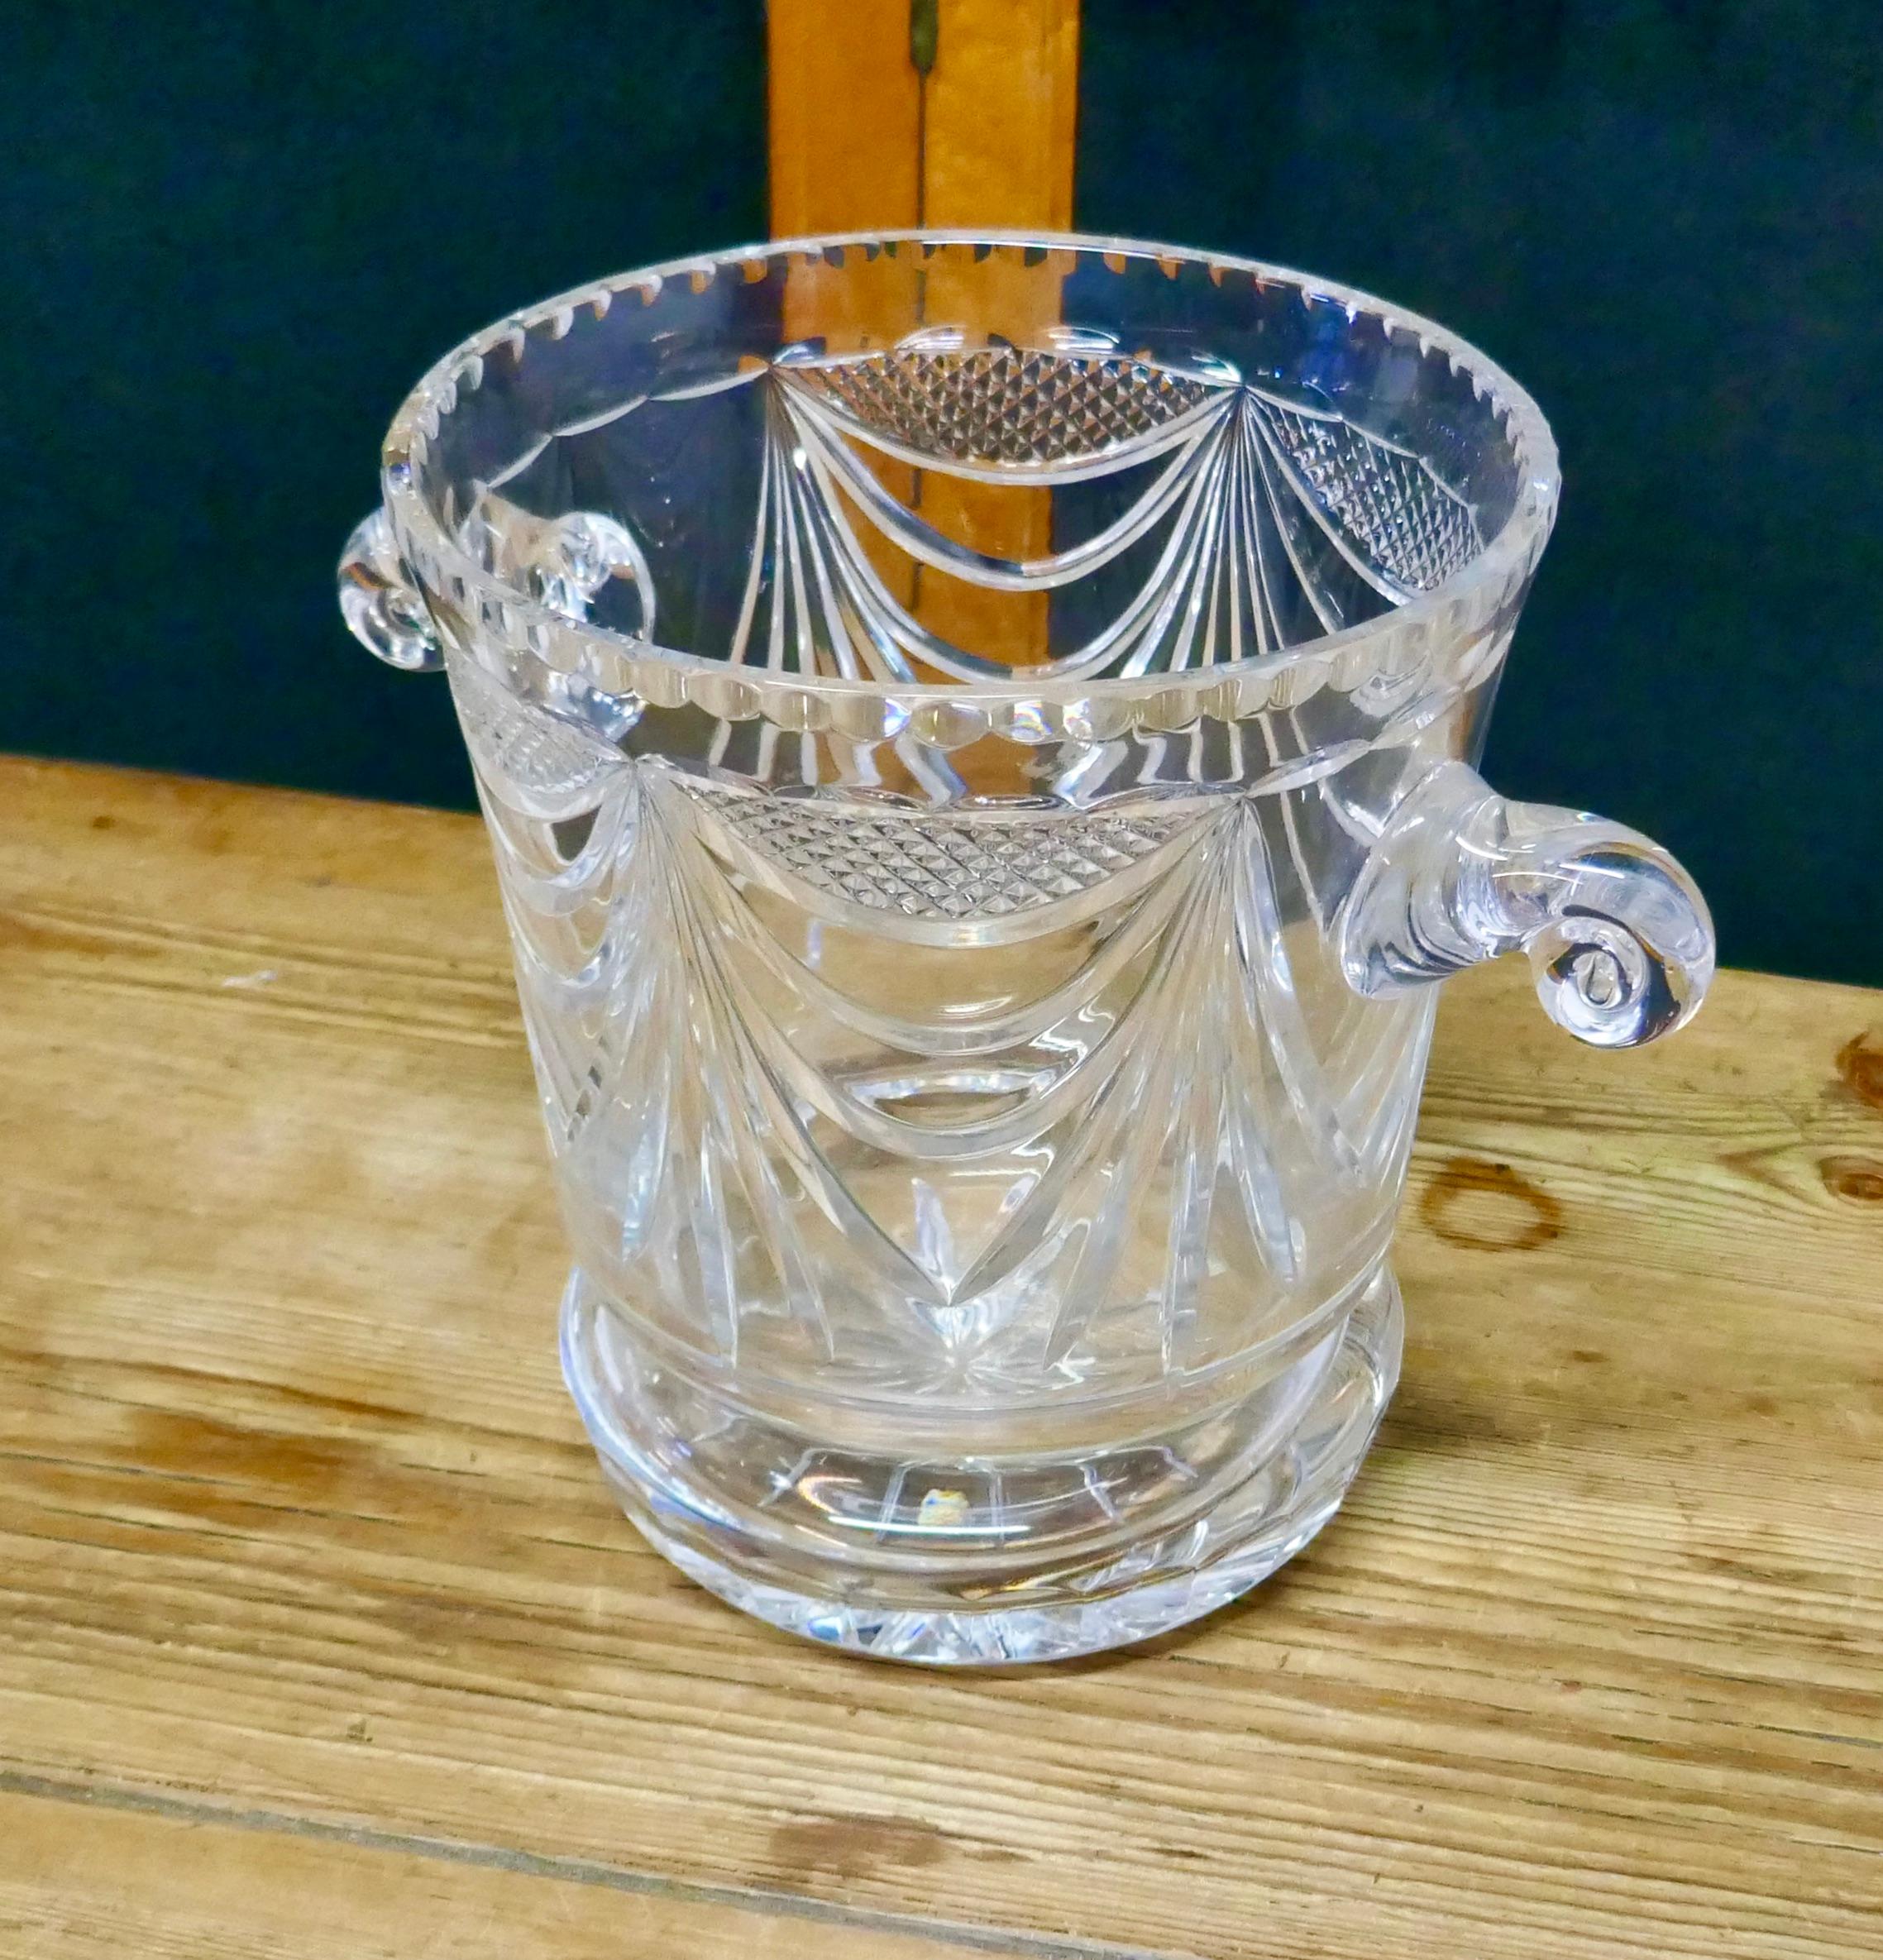 French Art Deco hand blown cut crystal Champaign ice bucket, wine cooler

A superb piece of artisan made crystal
The cooler or Ice bucket is used but it is otherwise perfect and has a beautiful ring when tapped
This design dates from the